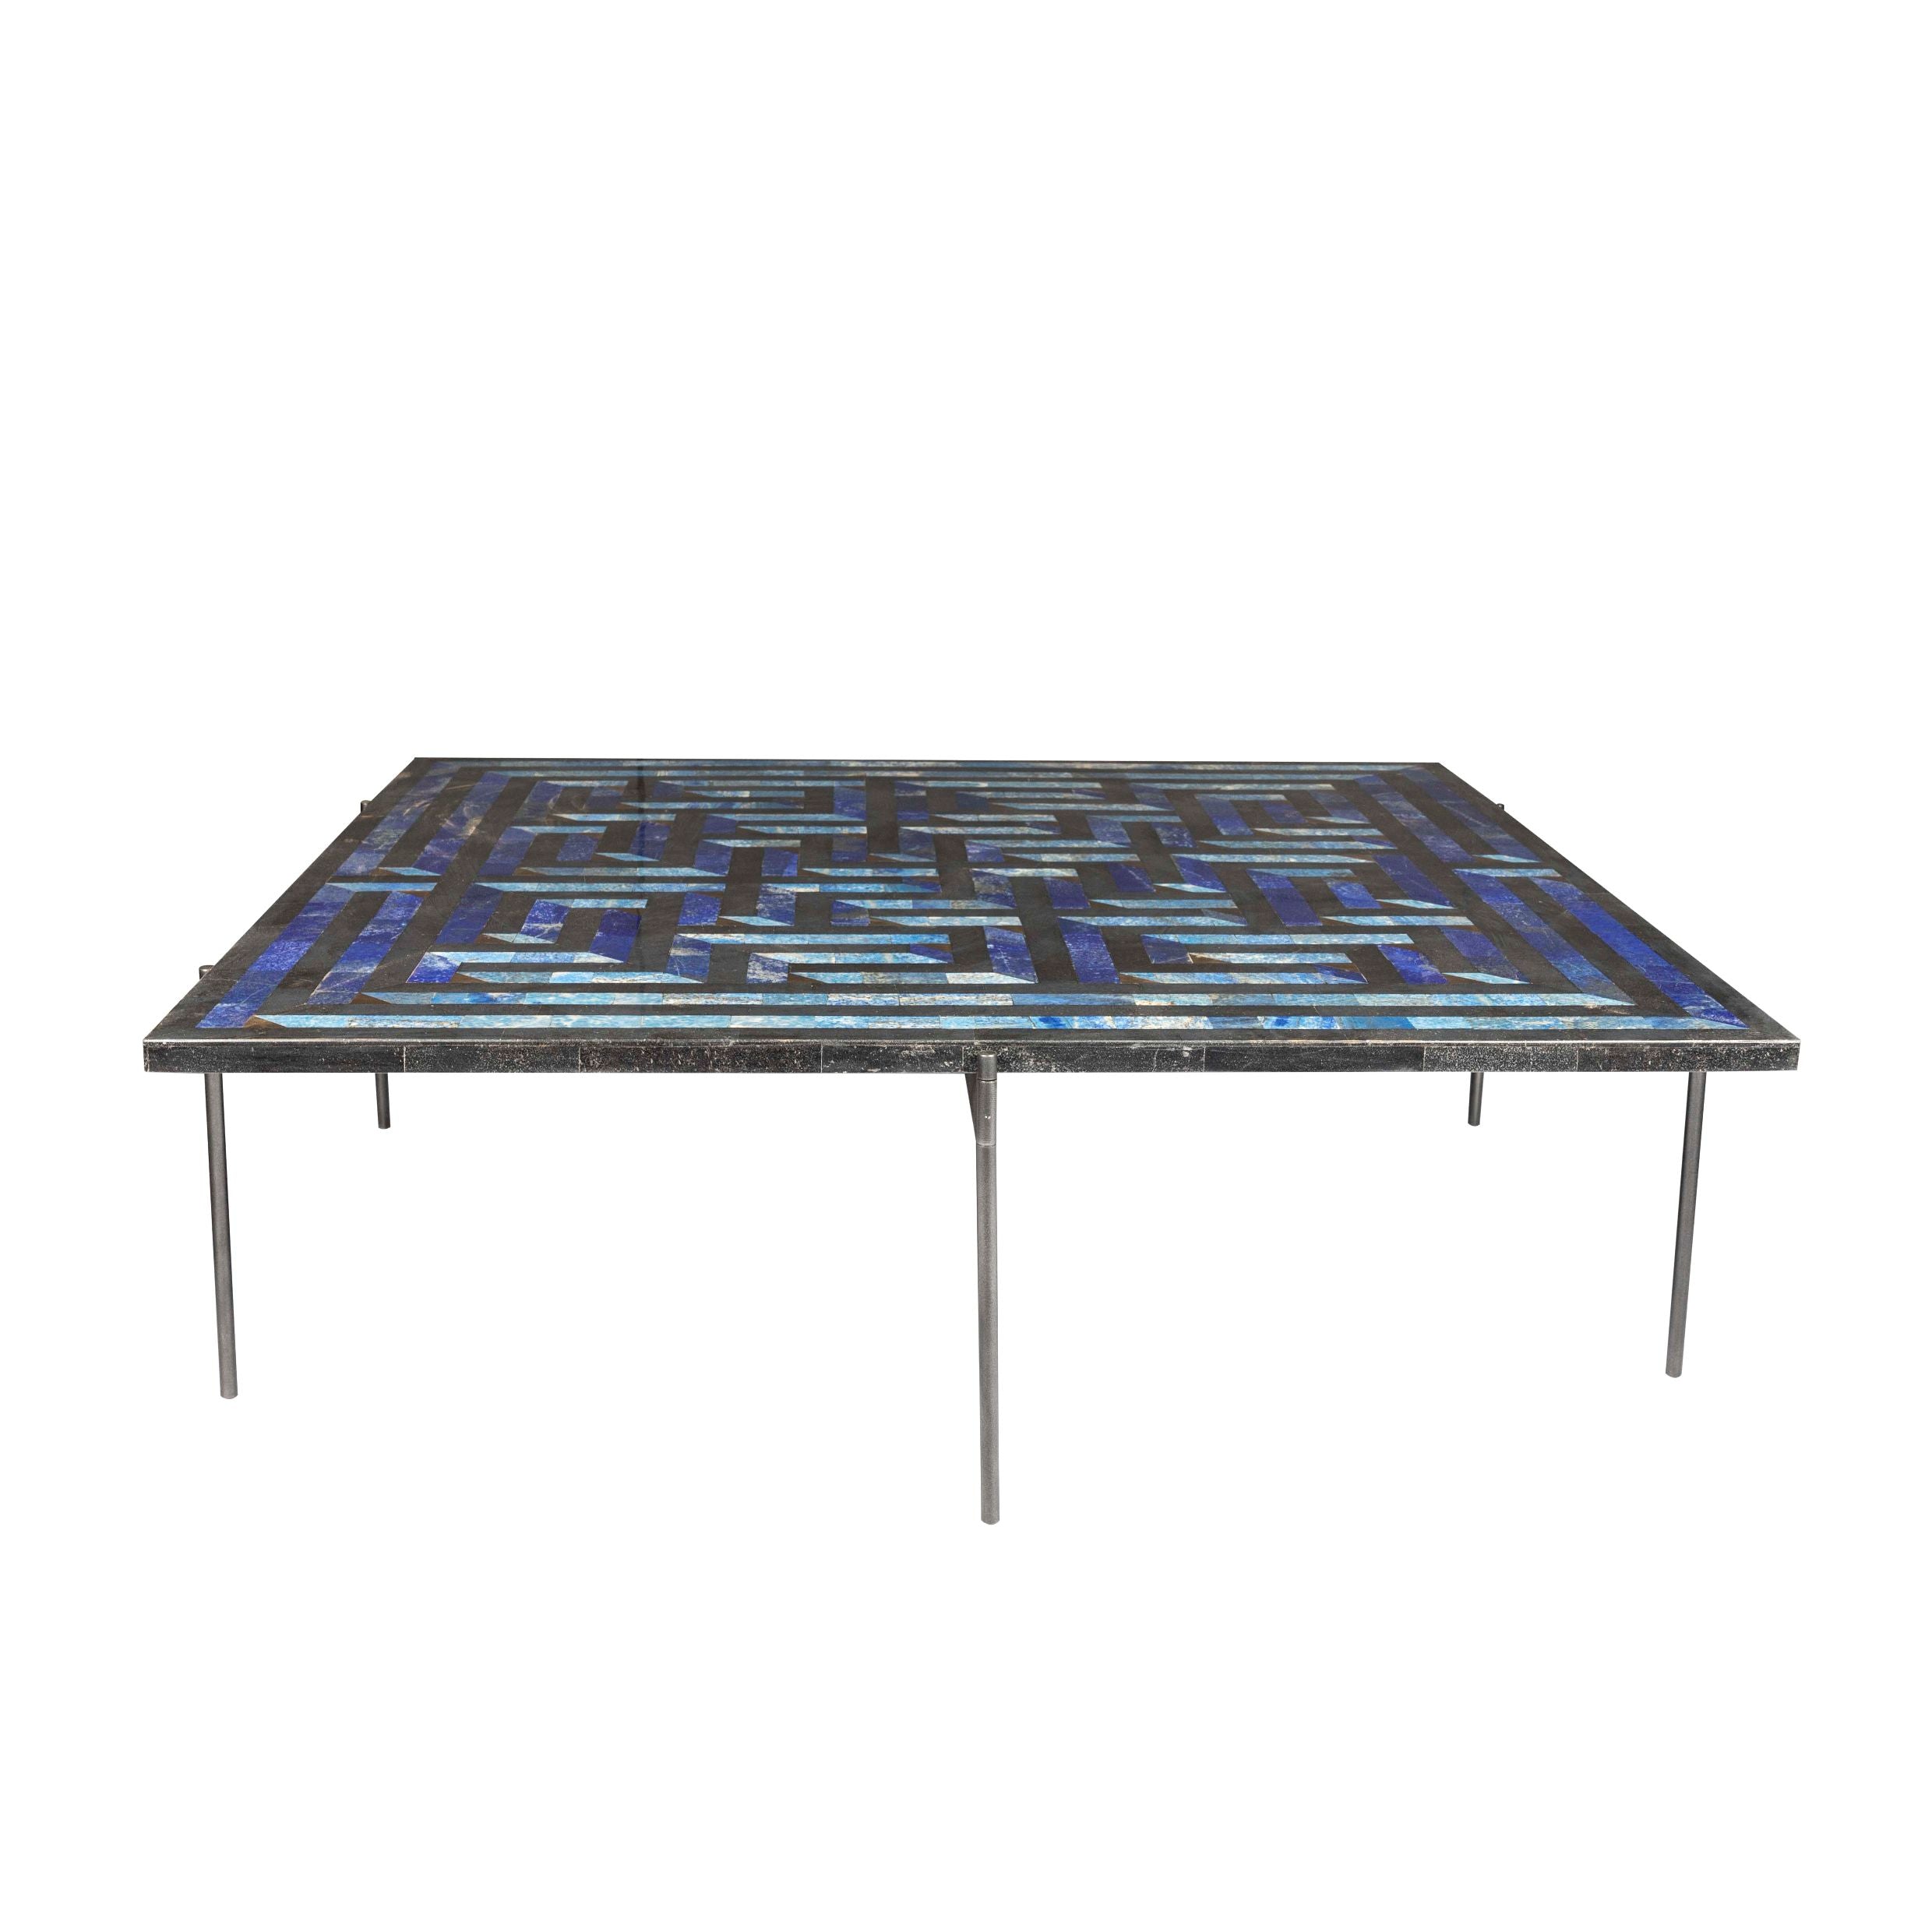 Amaze table Deeg Square Furniture , Stone Overlay , Coffee table intricate interlocking pattern marble inlay, handcrafted, made in India, artist